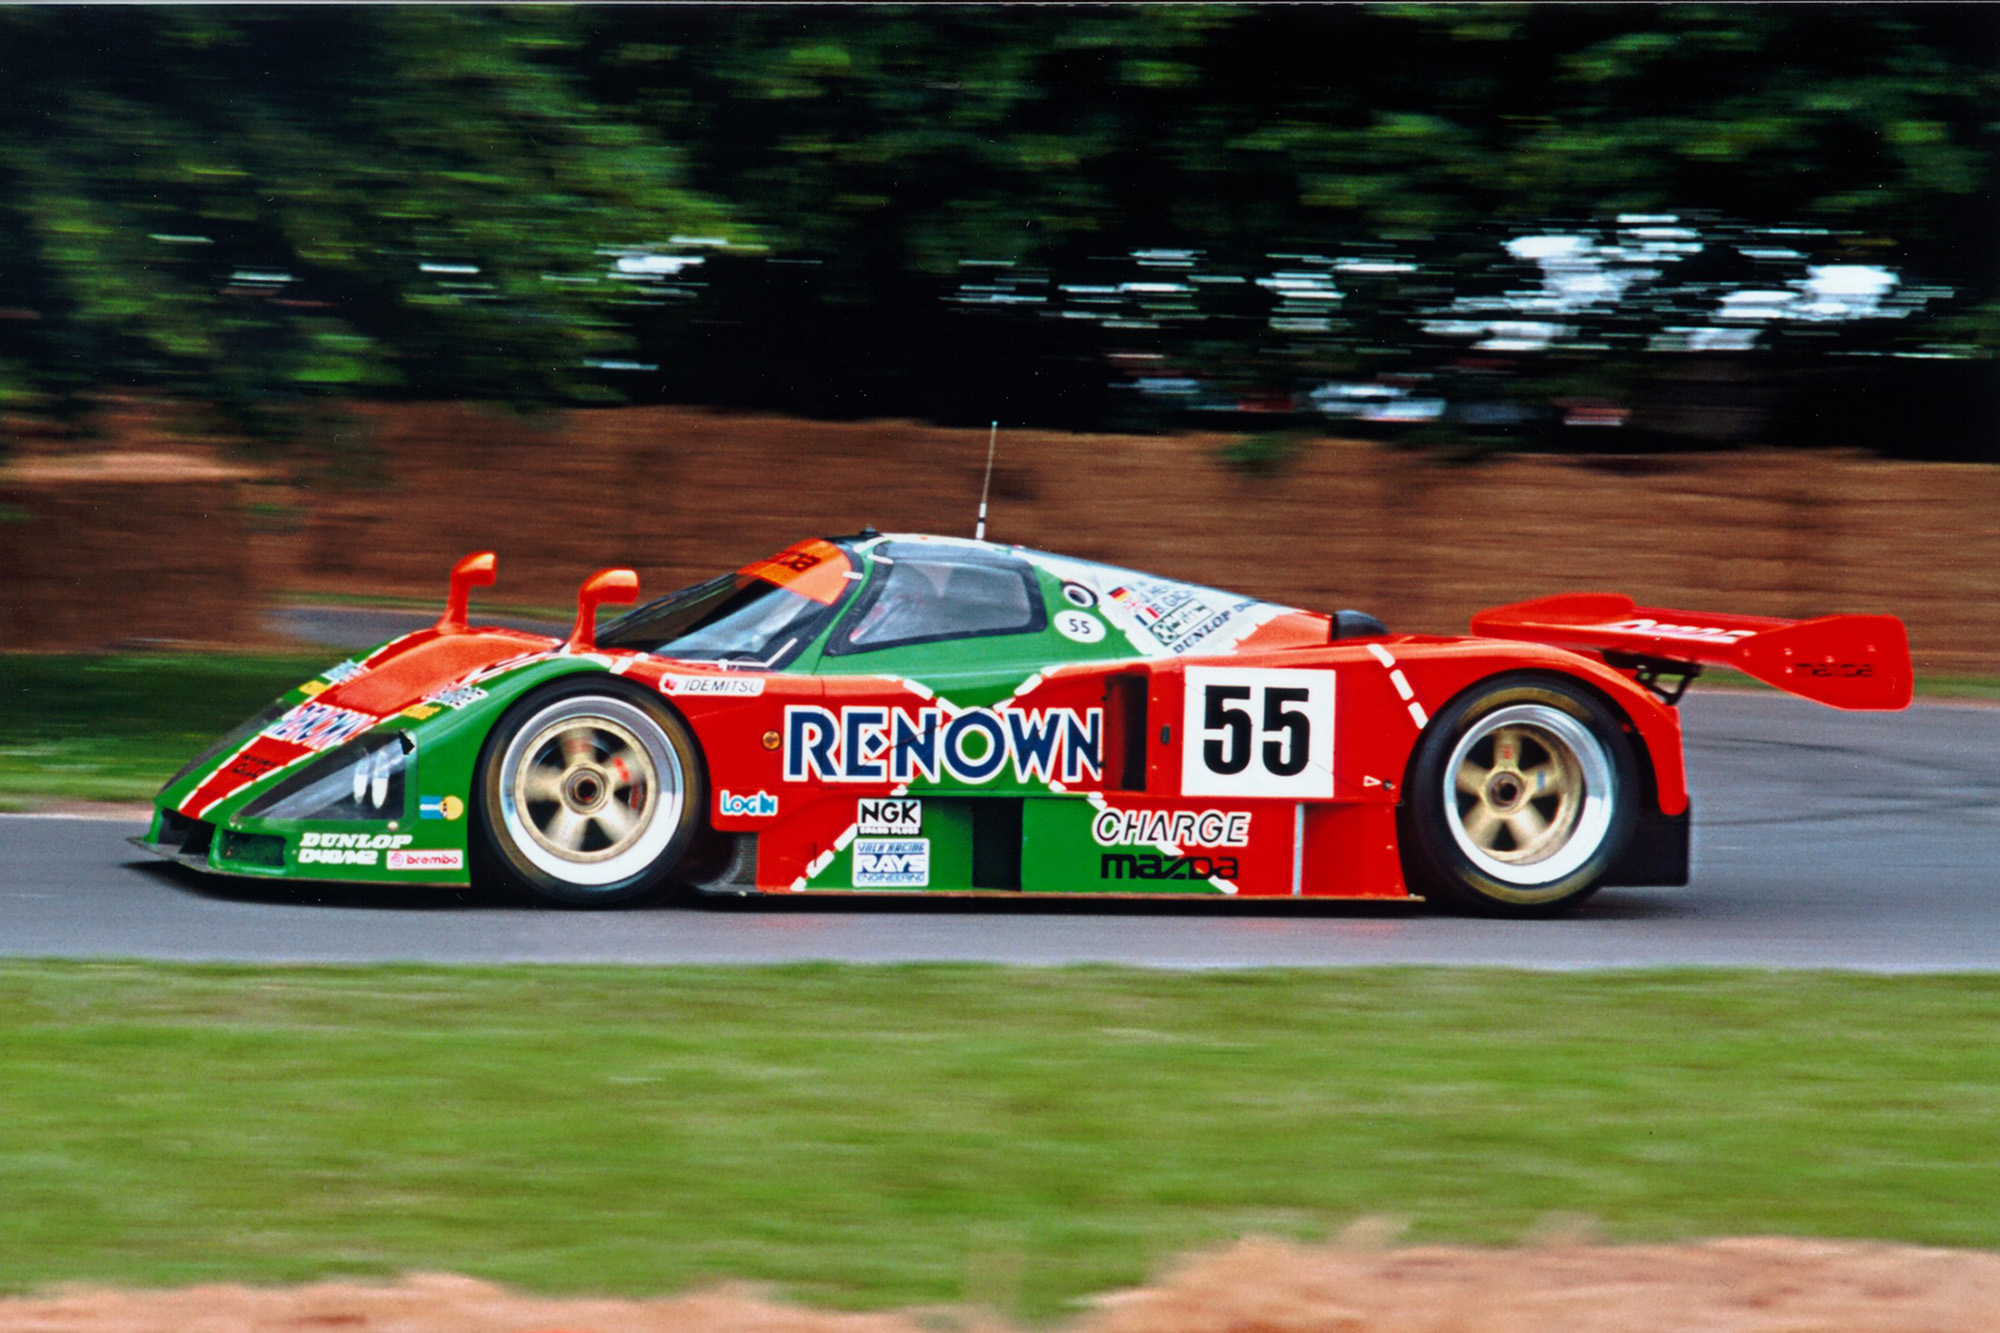 Mazda 787b Backgrounds, Compatible - PC, Mobile, Gadgets| 2000x1333 px